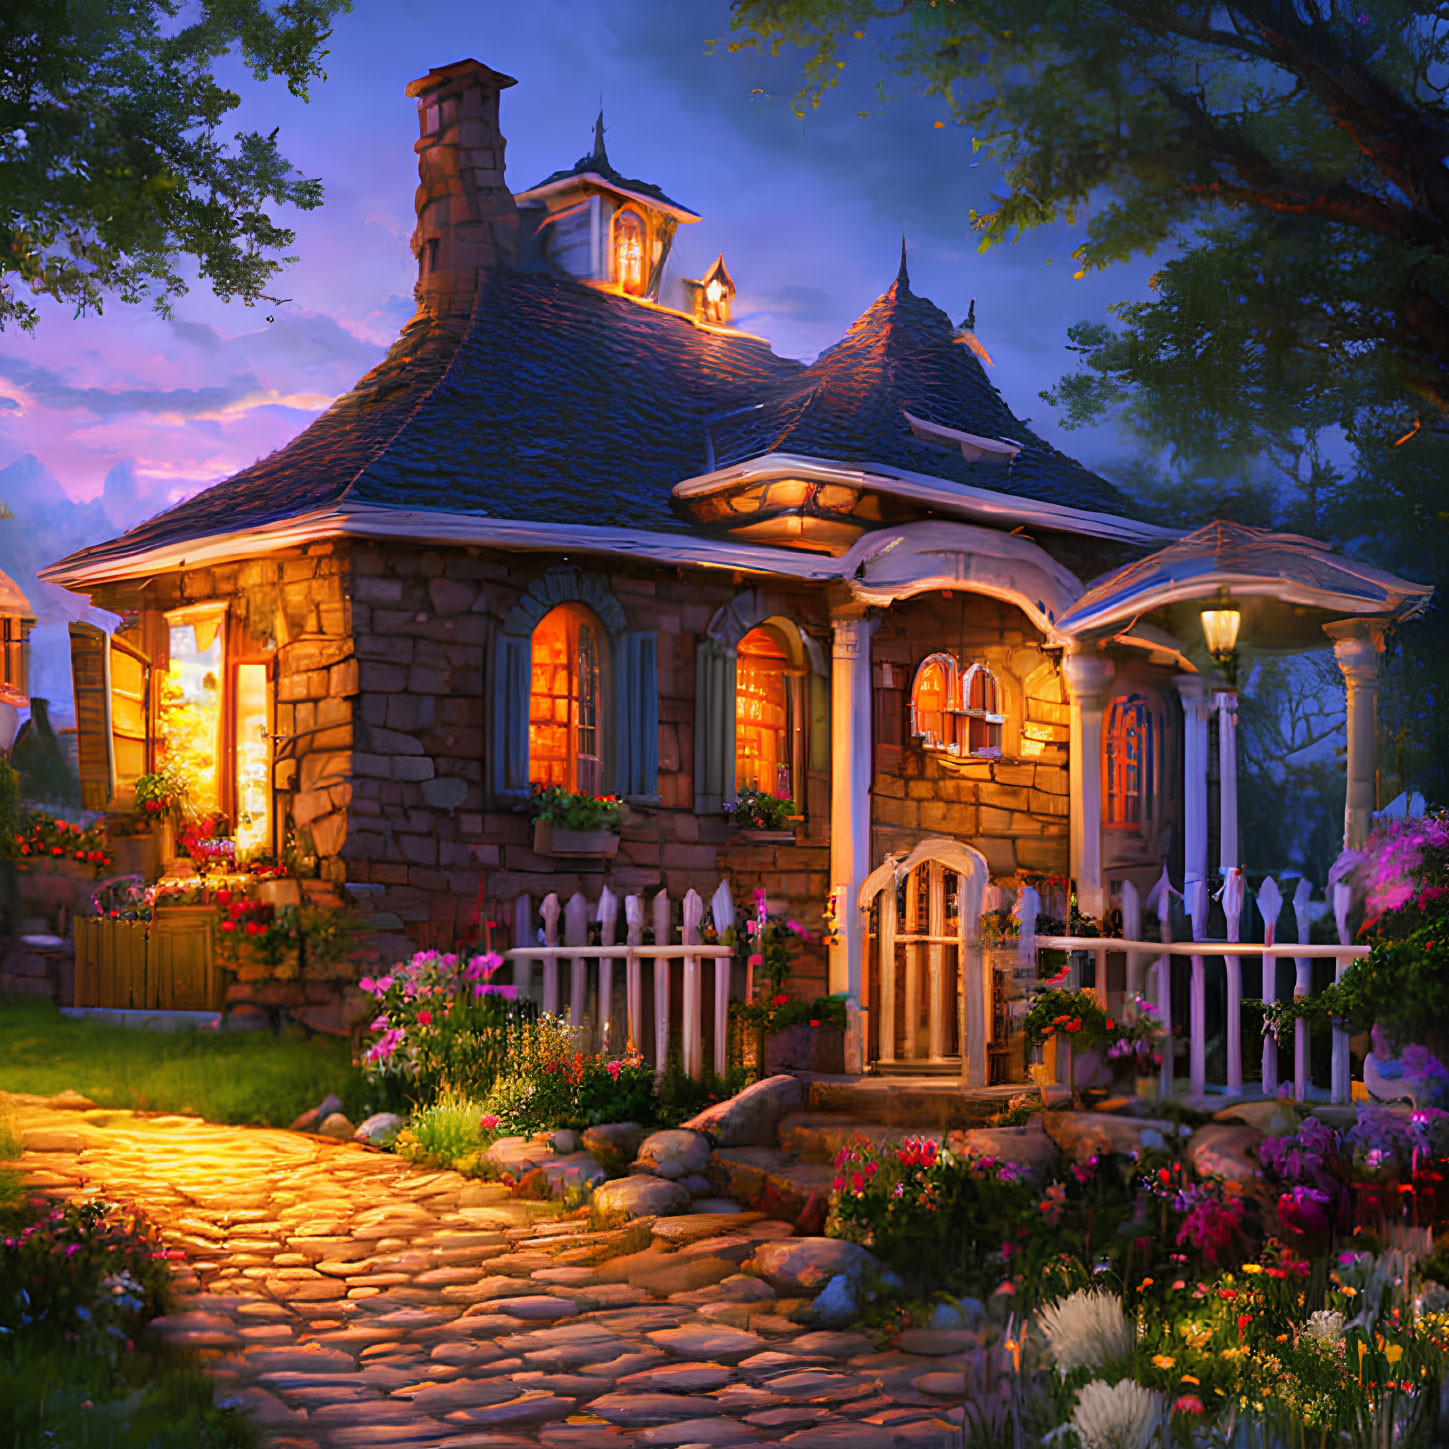 Stone cottage with glowing windows in twilight garden setting